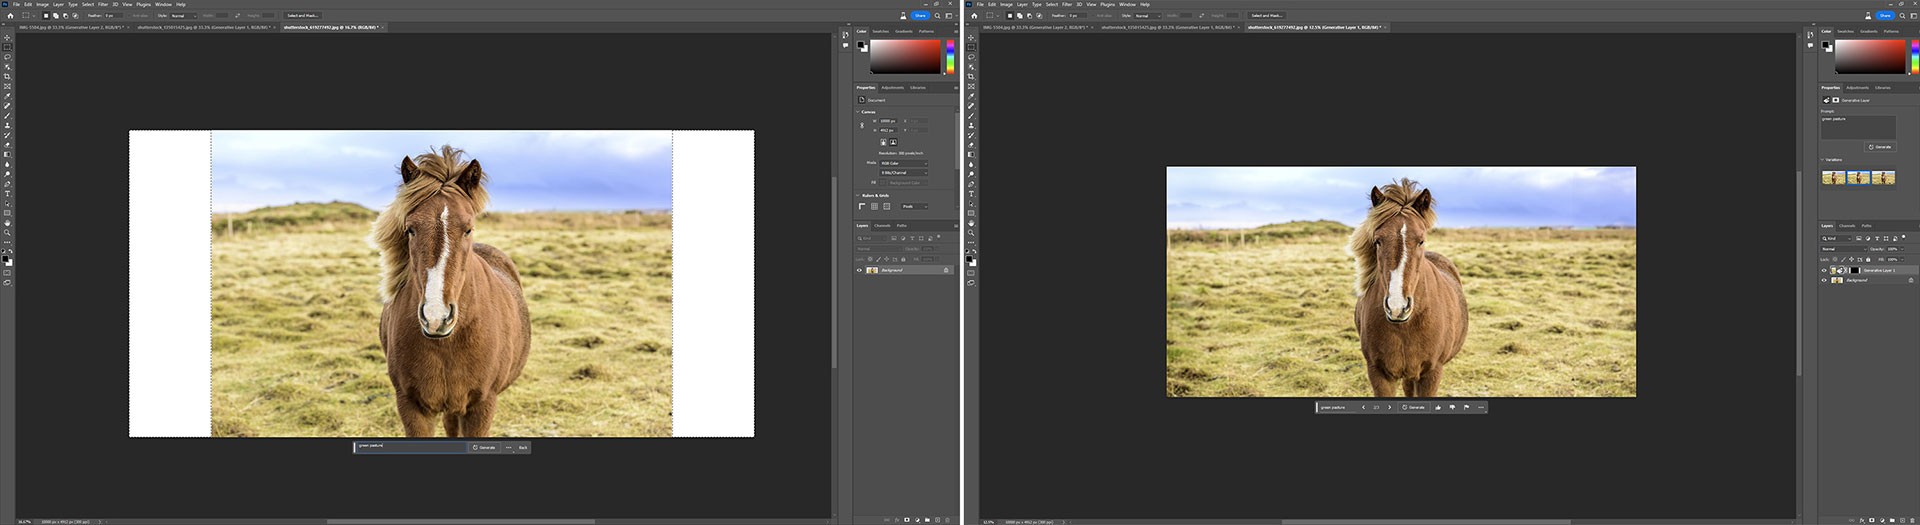 Two side-by-side images in Photoshop of an Icelandic brown horse in a field showing the before and after of using Generative Fill to extend the original image on either side of the horse.